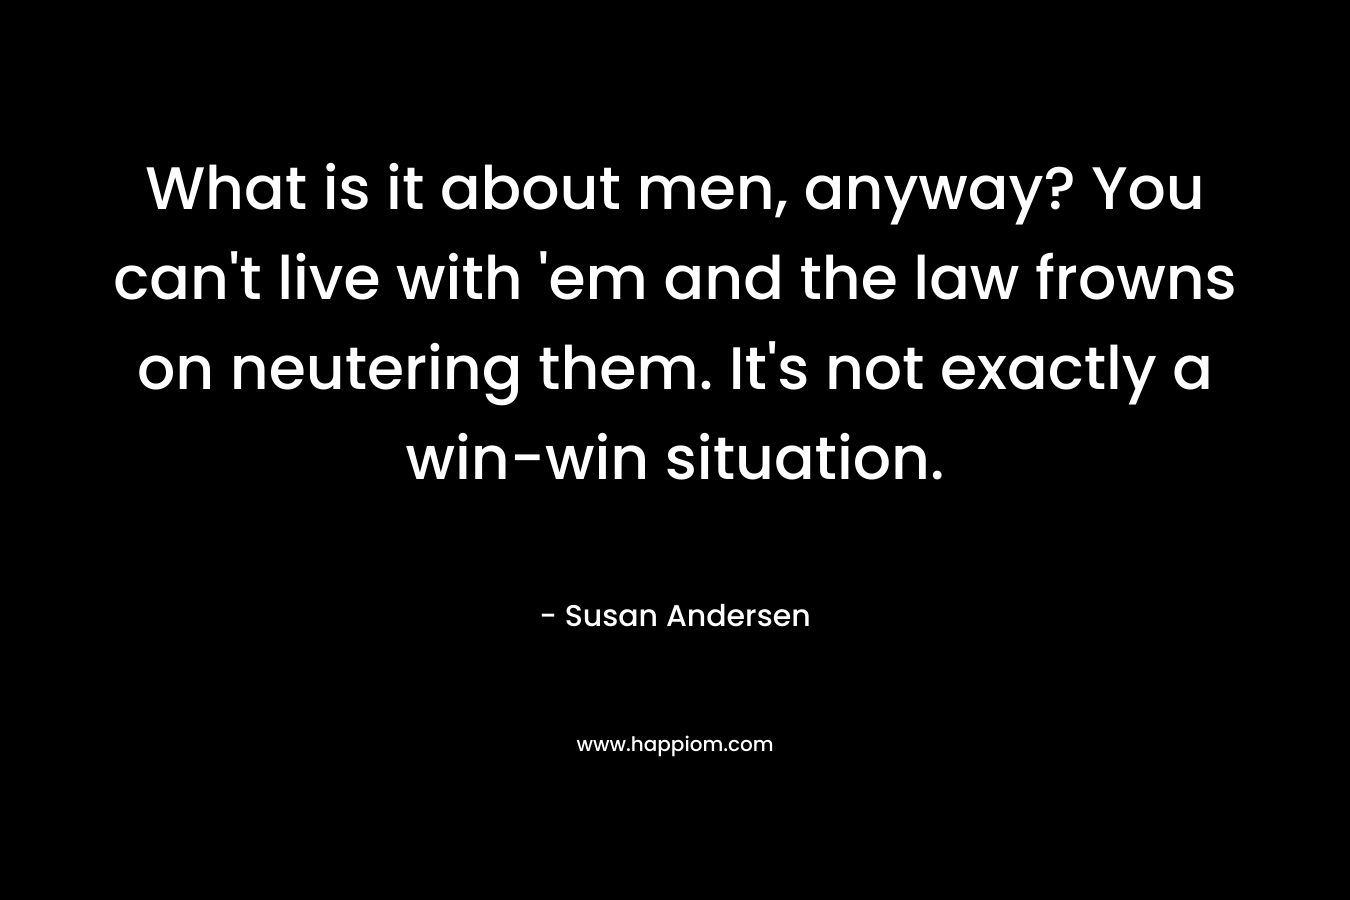 What is it about men, anyway? You can’t live with ’em and the law frowns on neutering them. It’s not exactly a win-win situation. – Susan Andersen